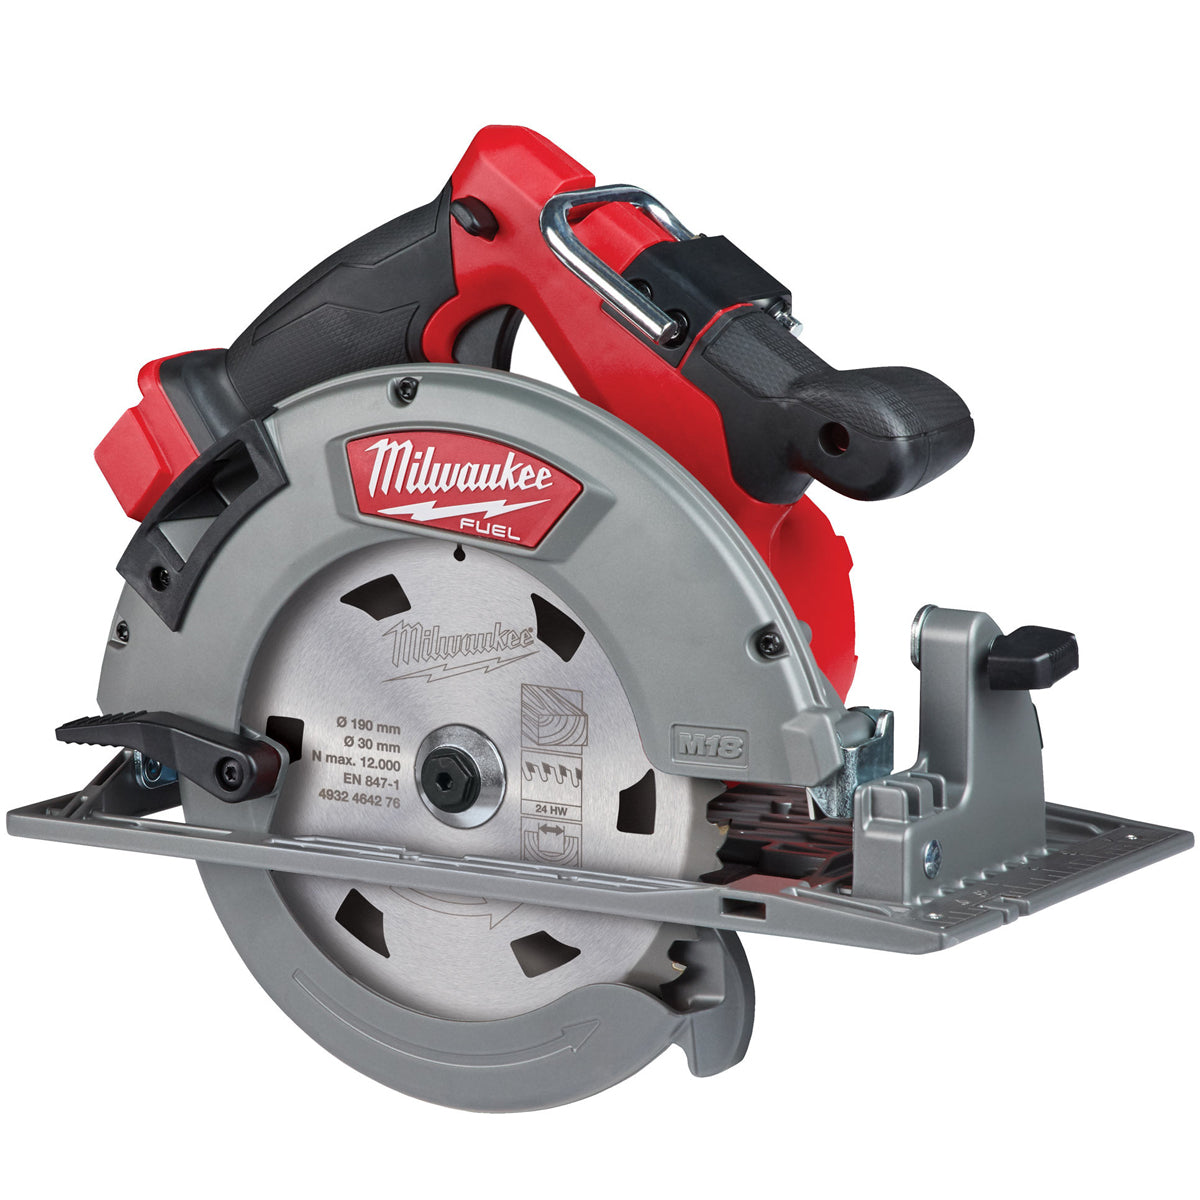 Milwaukee M18FCS66-0 M18 18V Fuel Brushless 66mm Circular Saw with 2 x 5.0Ah Battery & Charger